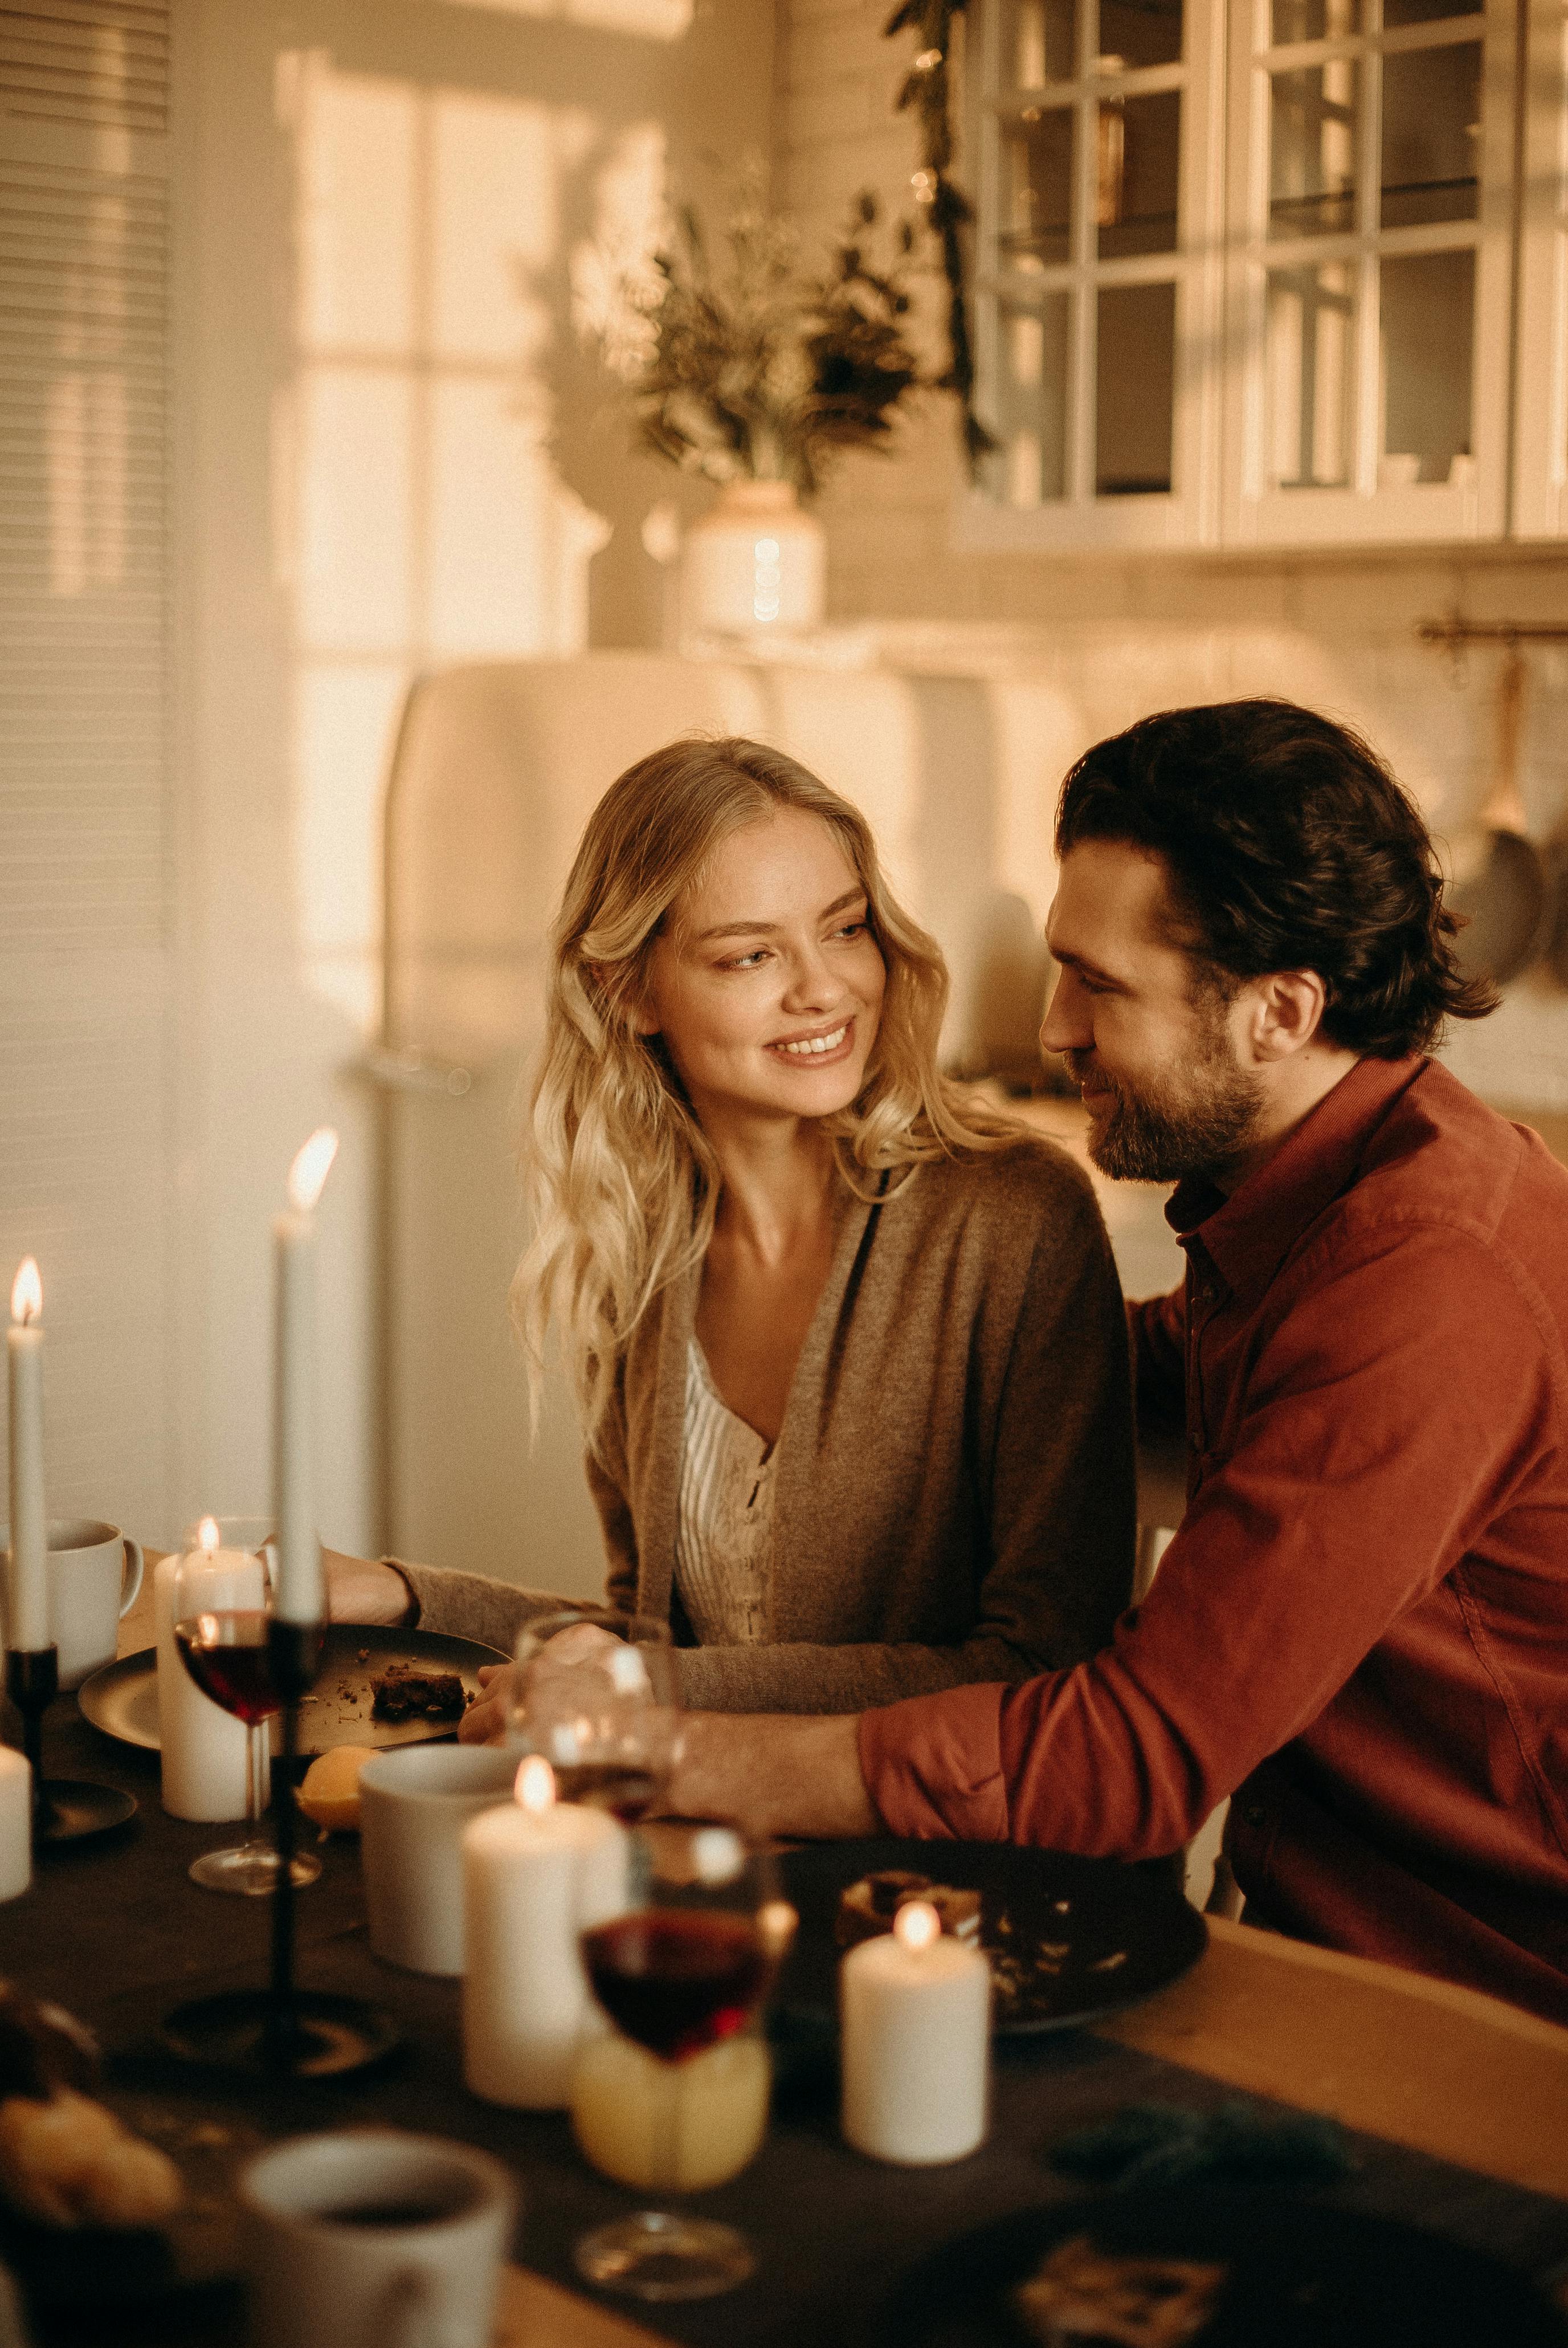 A couple sitting at the table | Source: Pexels